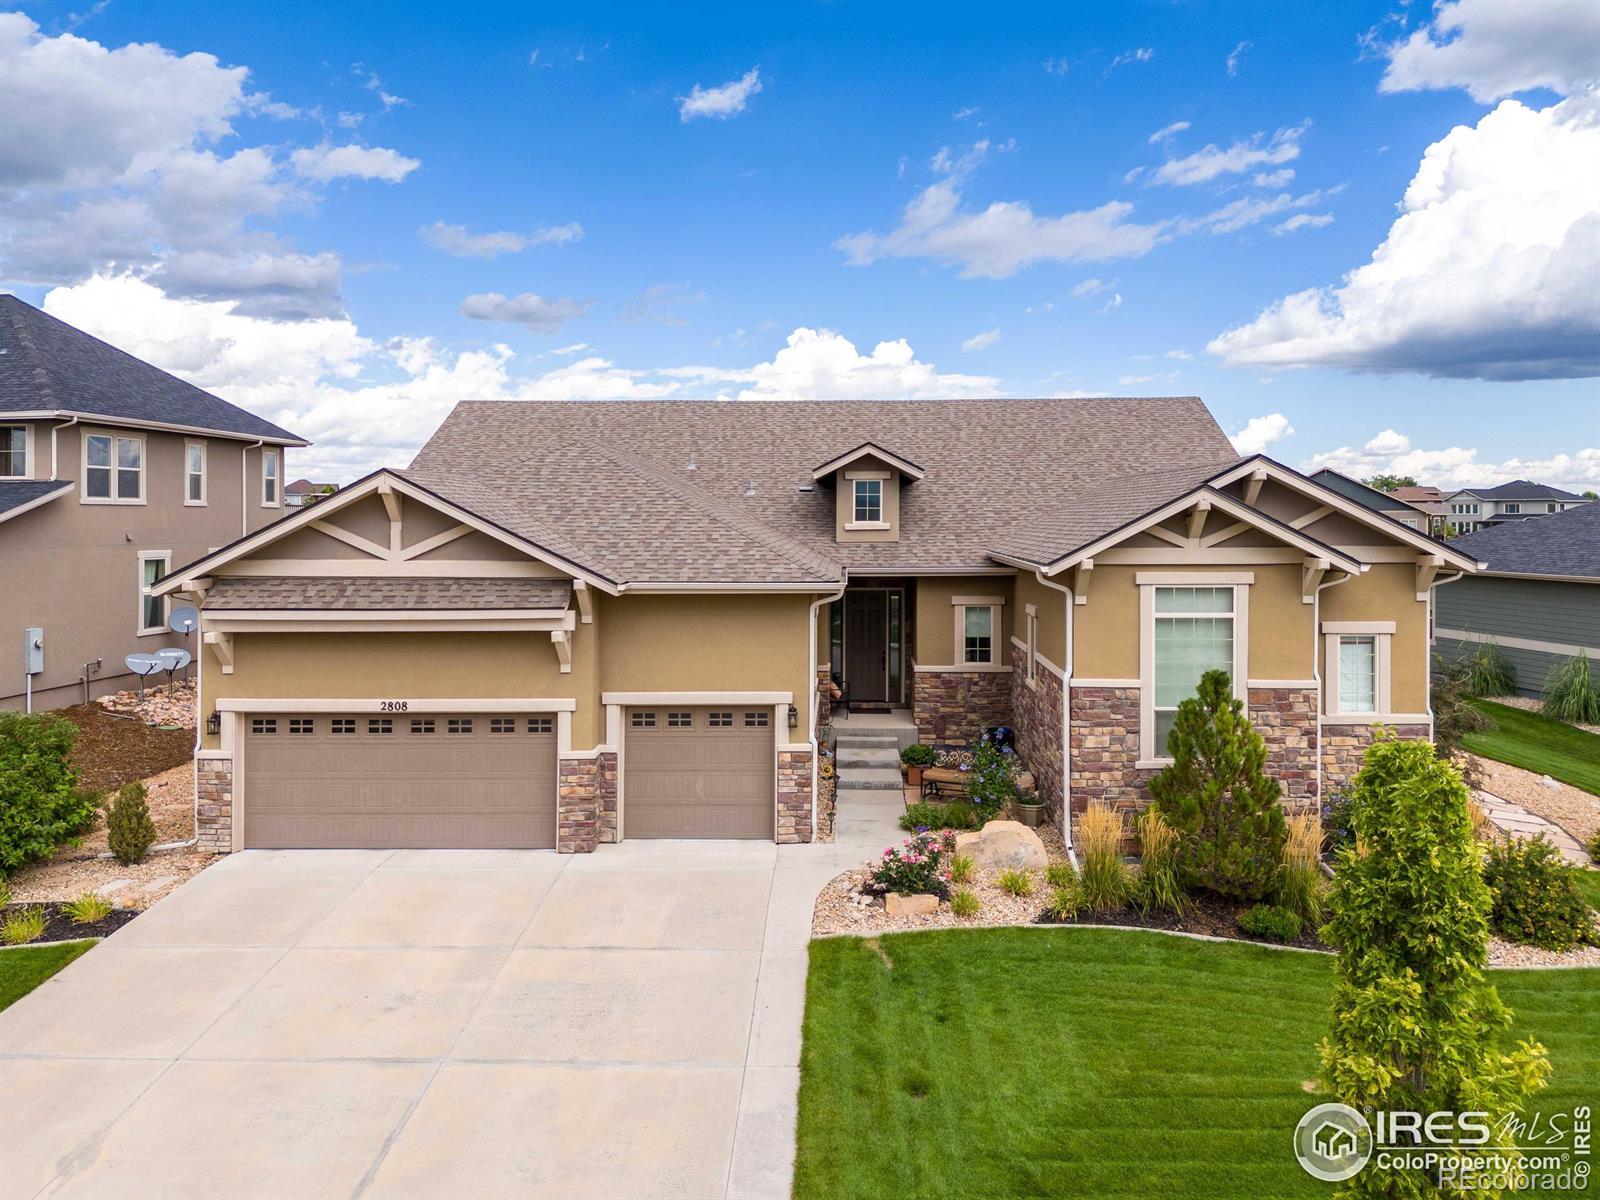 2808  Sunset View Drive, fort collins MLS: 4567891004622 Beds: 4 Baths: 4 Price: $1,299,000